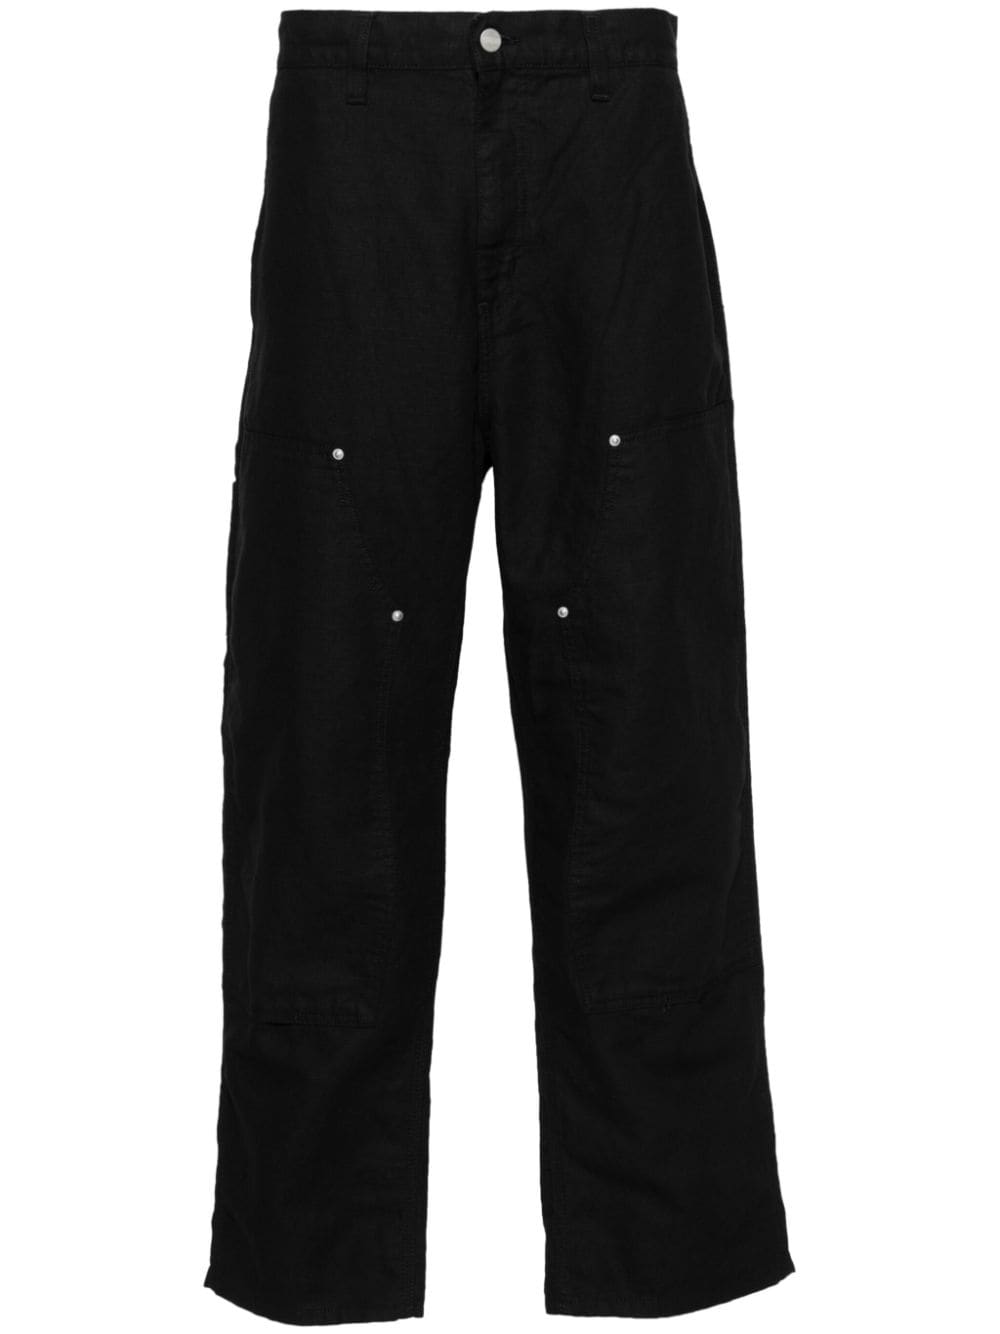 Walter Double-Knee tapered-leg trousers